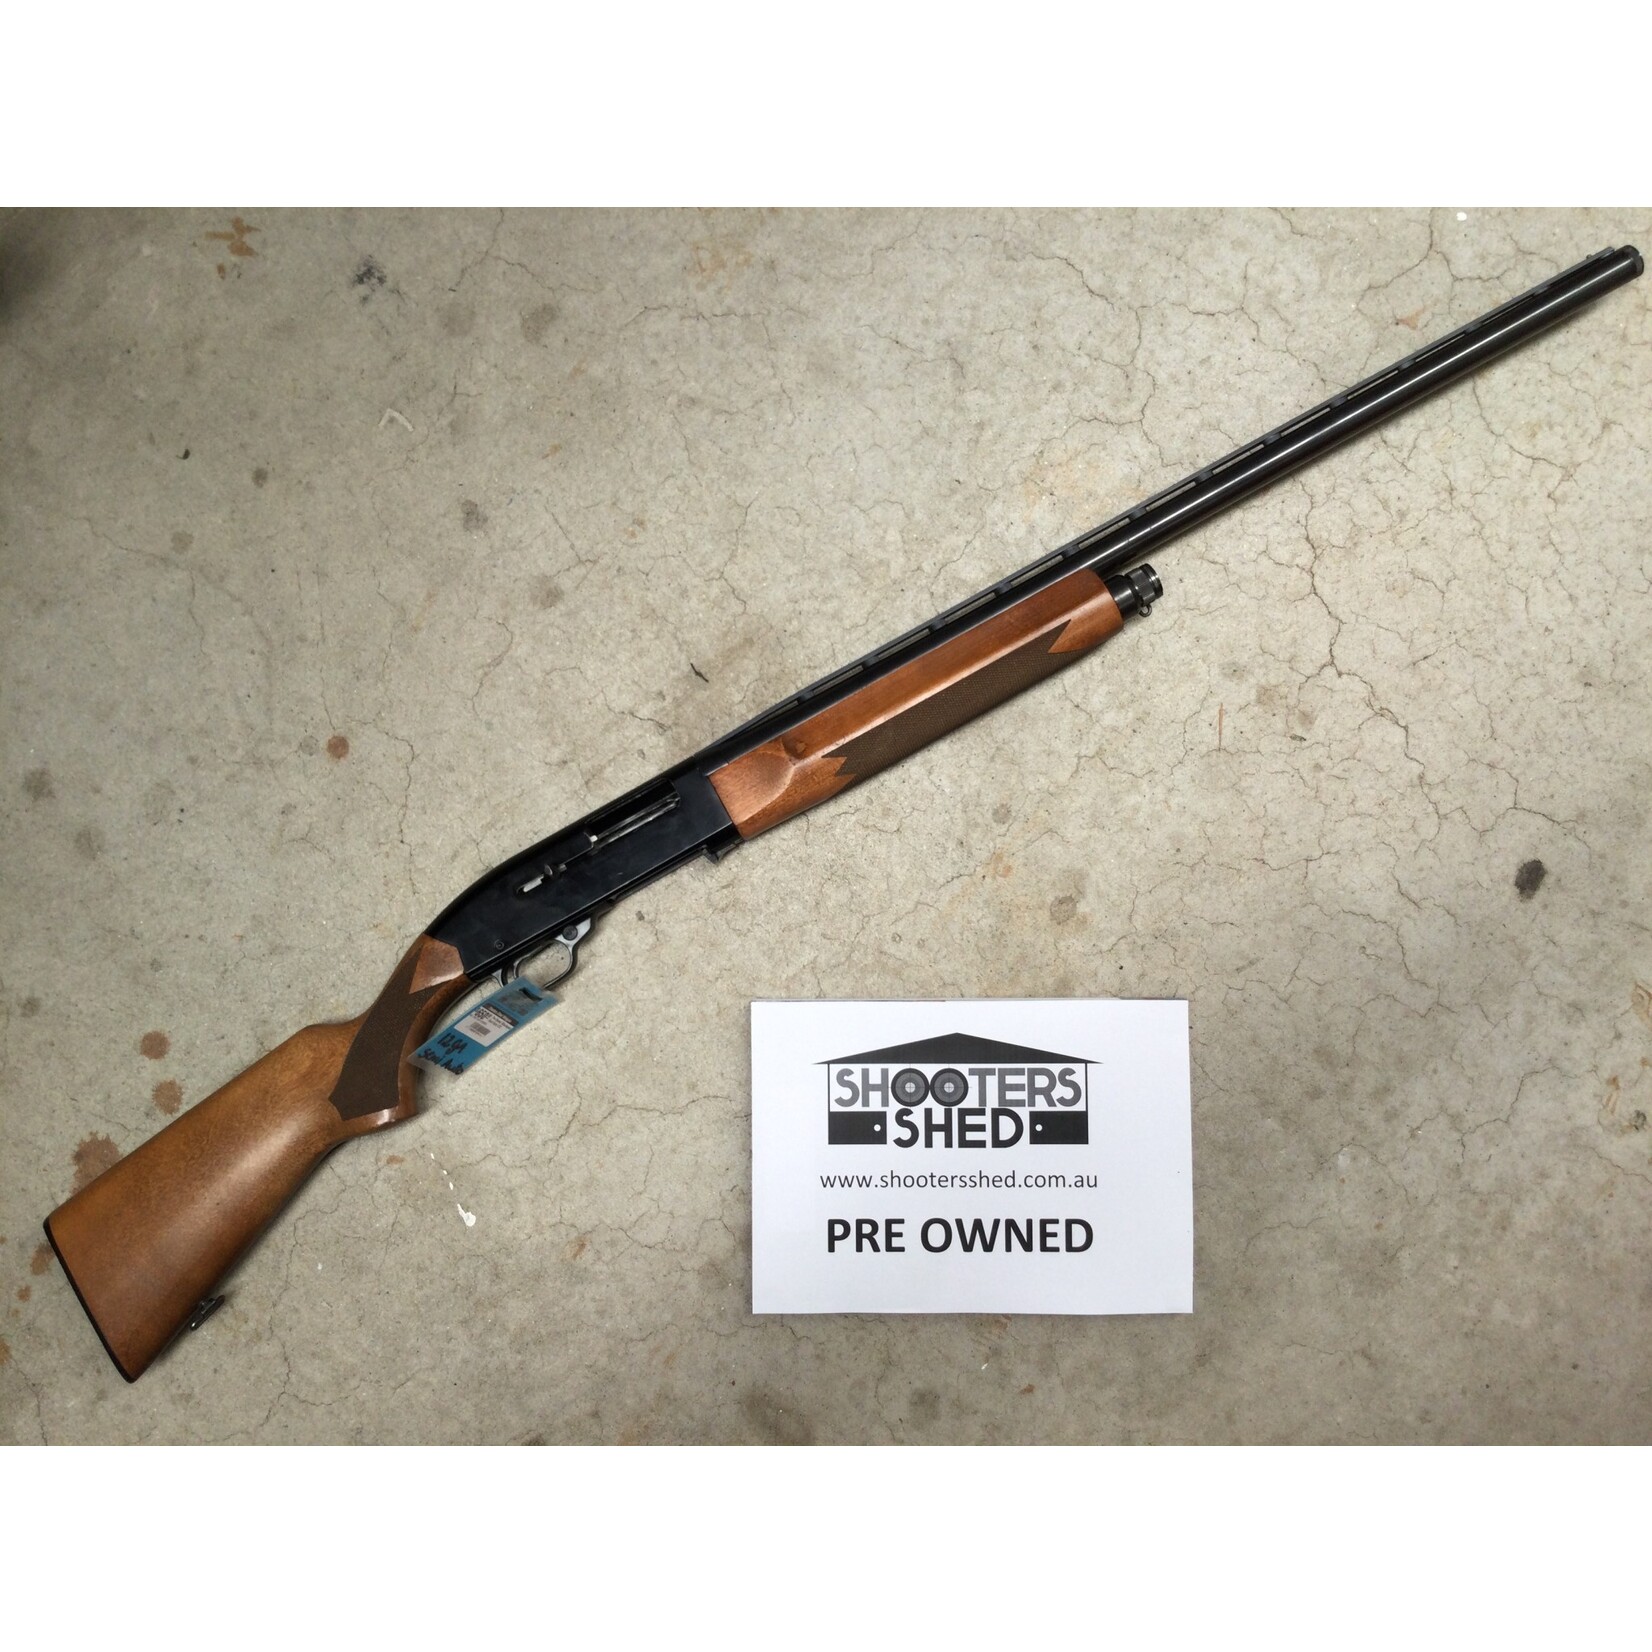 Winchester Pre Owned Winchester 140 Ranger Semi Auto 12G - 2 Shot Limited - Catagory C